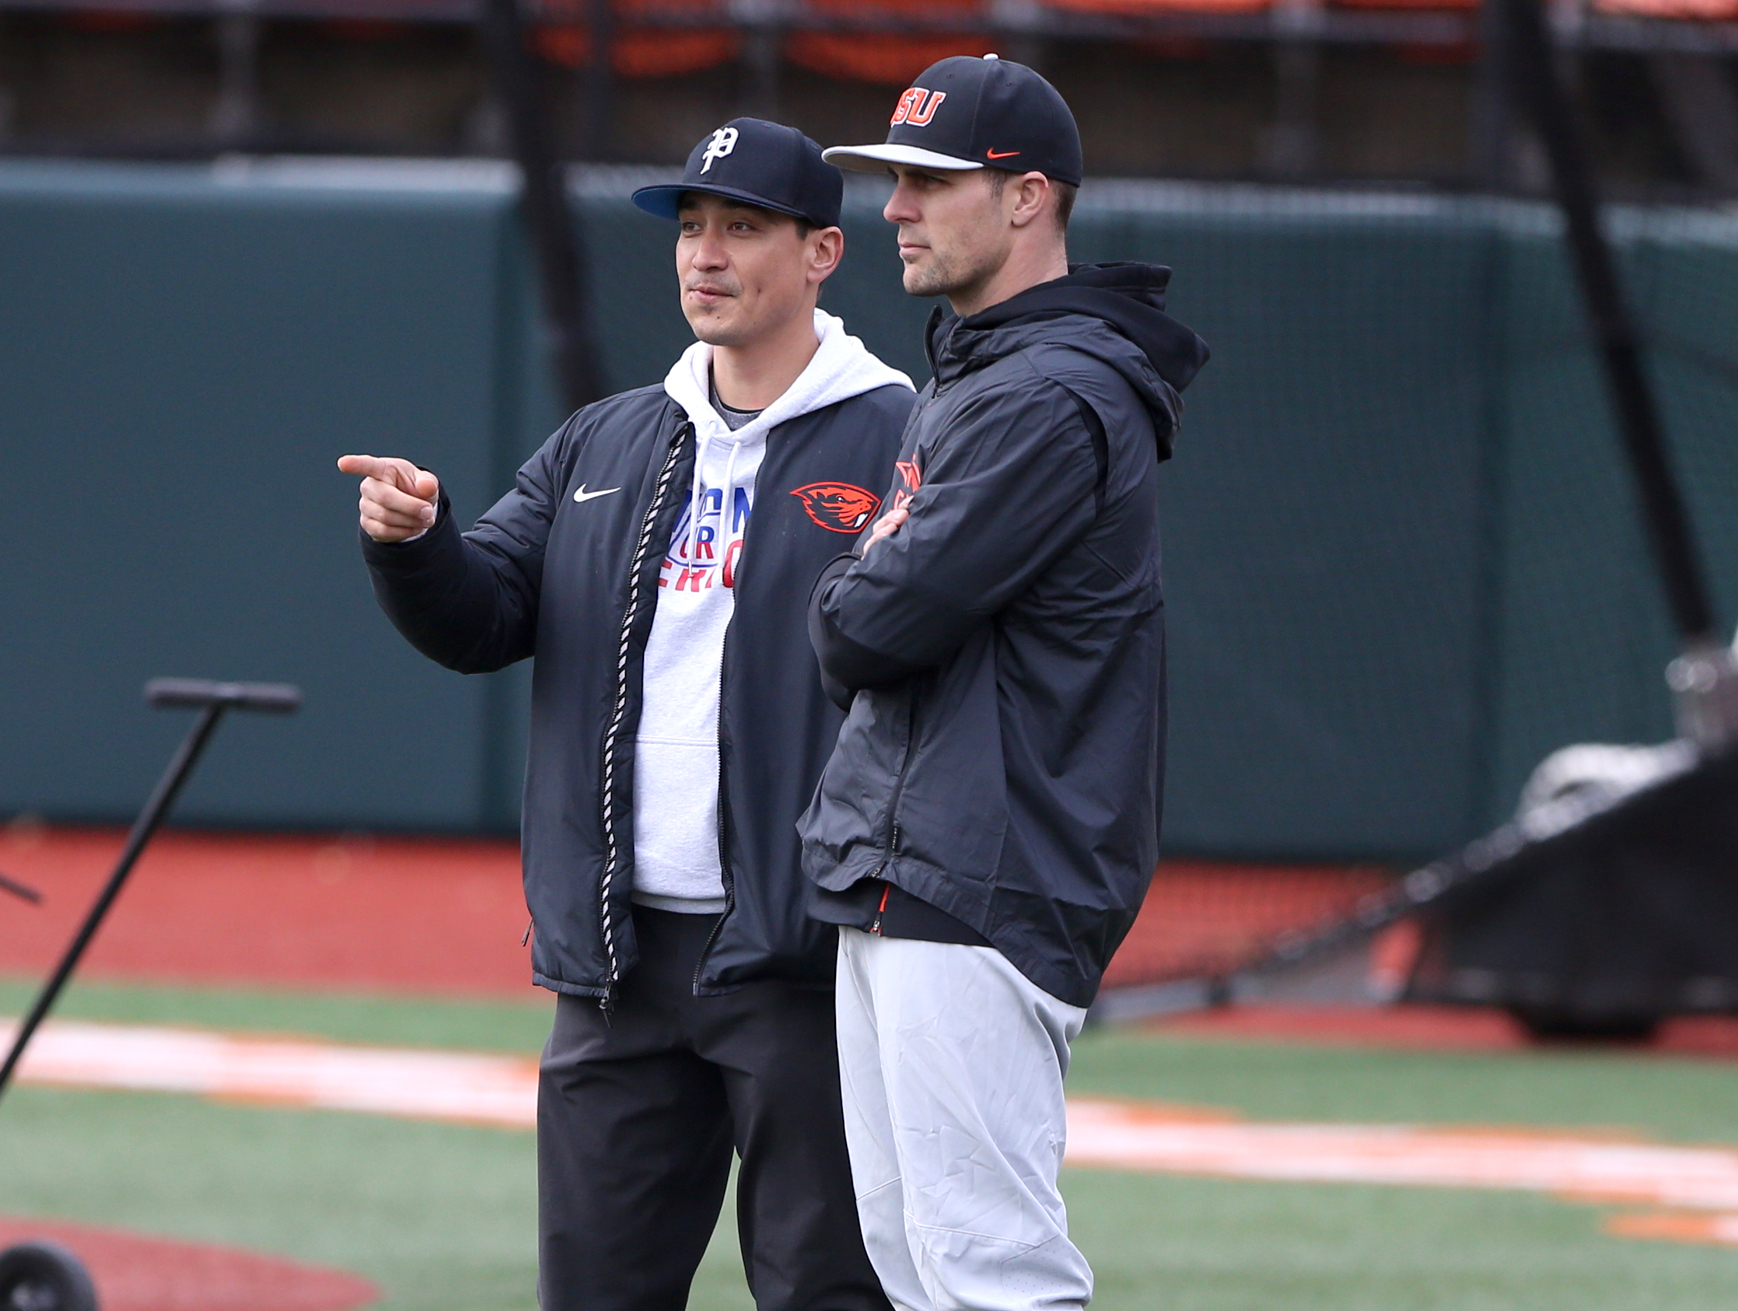 Former Oregon State baseball great Darwin Barney tabbed for role as  Beavers' volunteer assistant coach, camp coordinator 